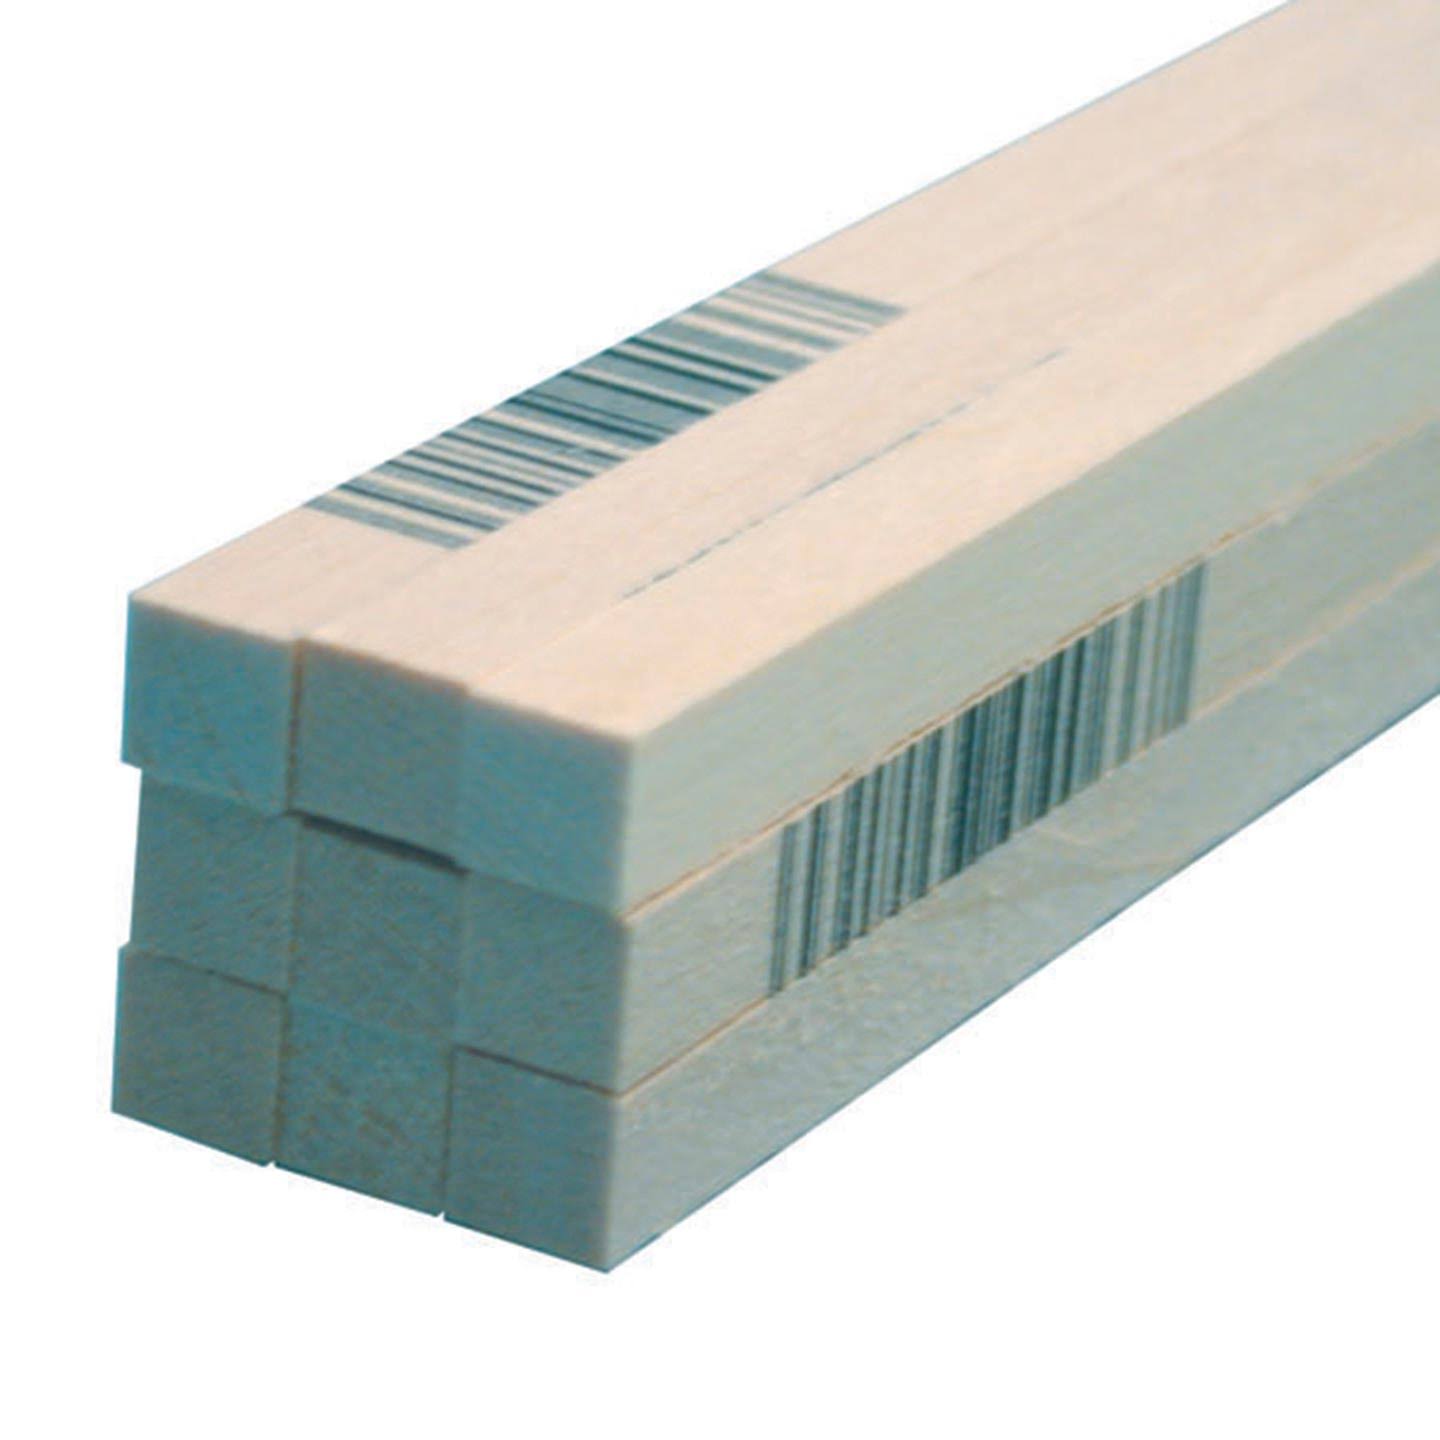 Midwest Basswood Strips - 15 Pieces, 3/8" x 3/8" x 24"